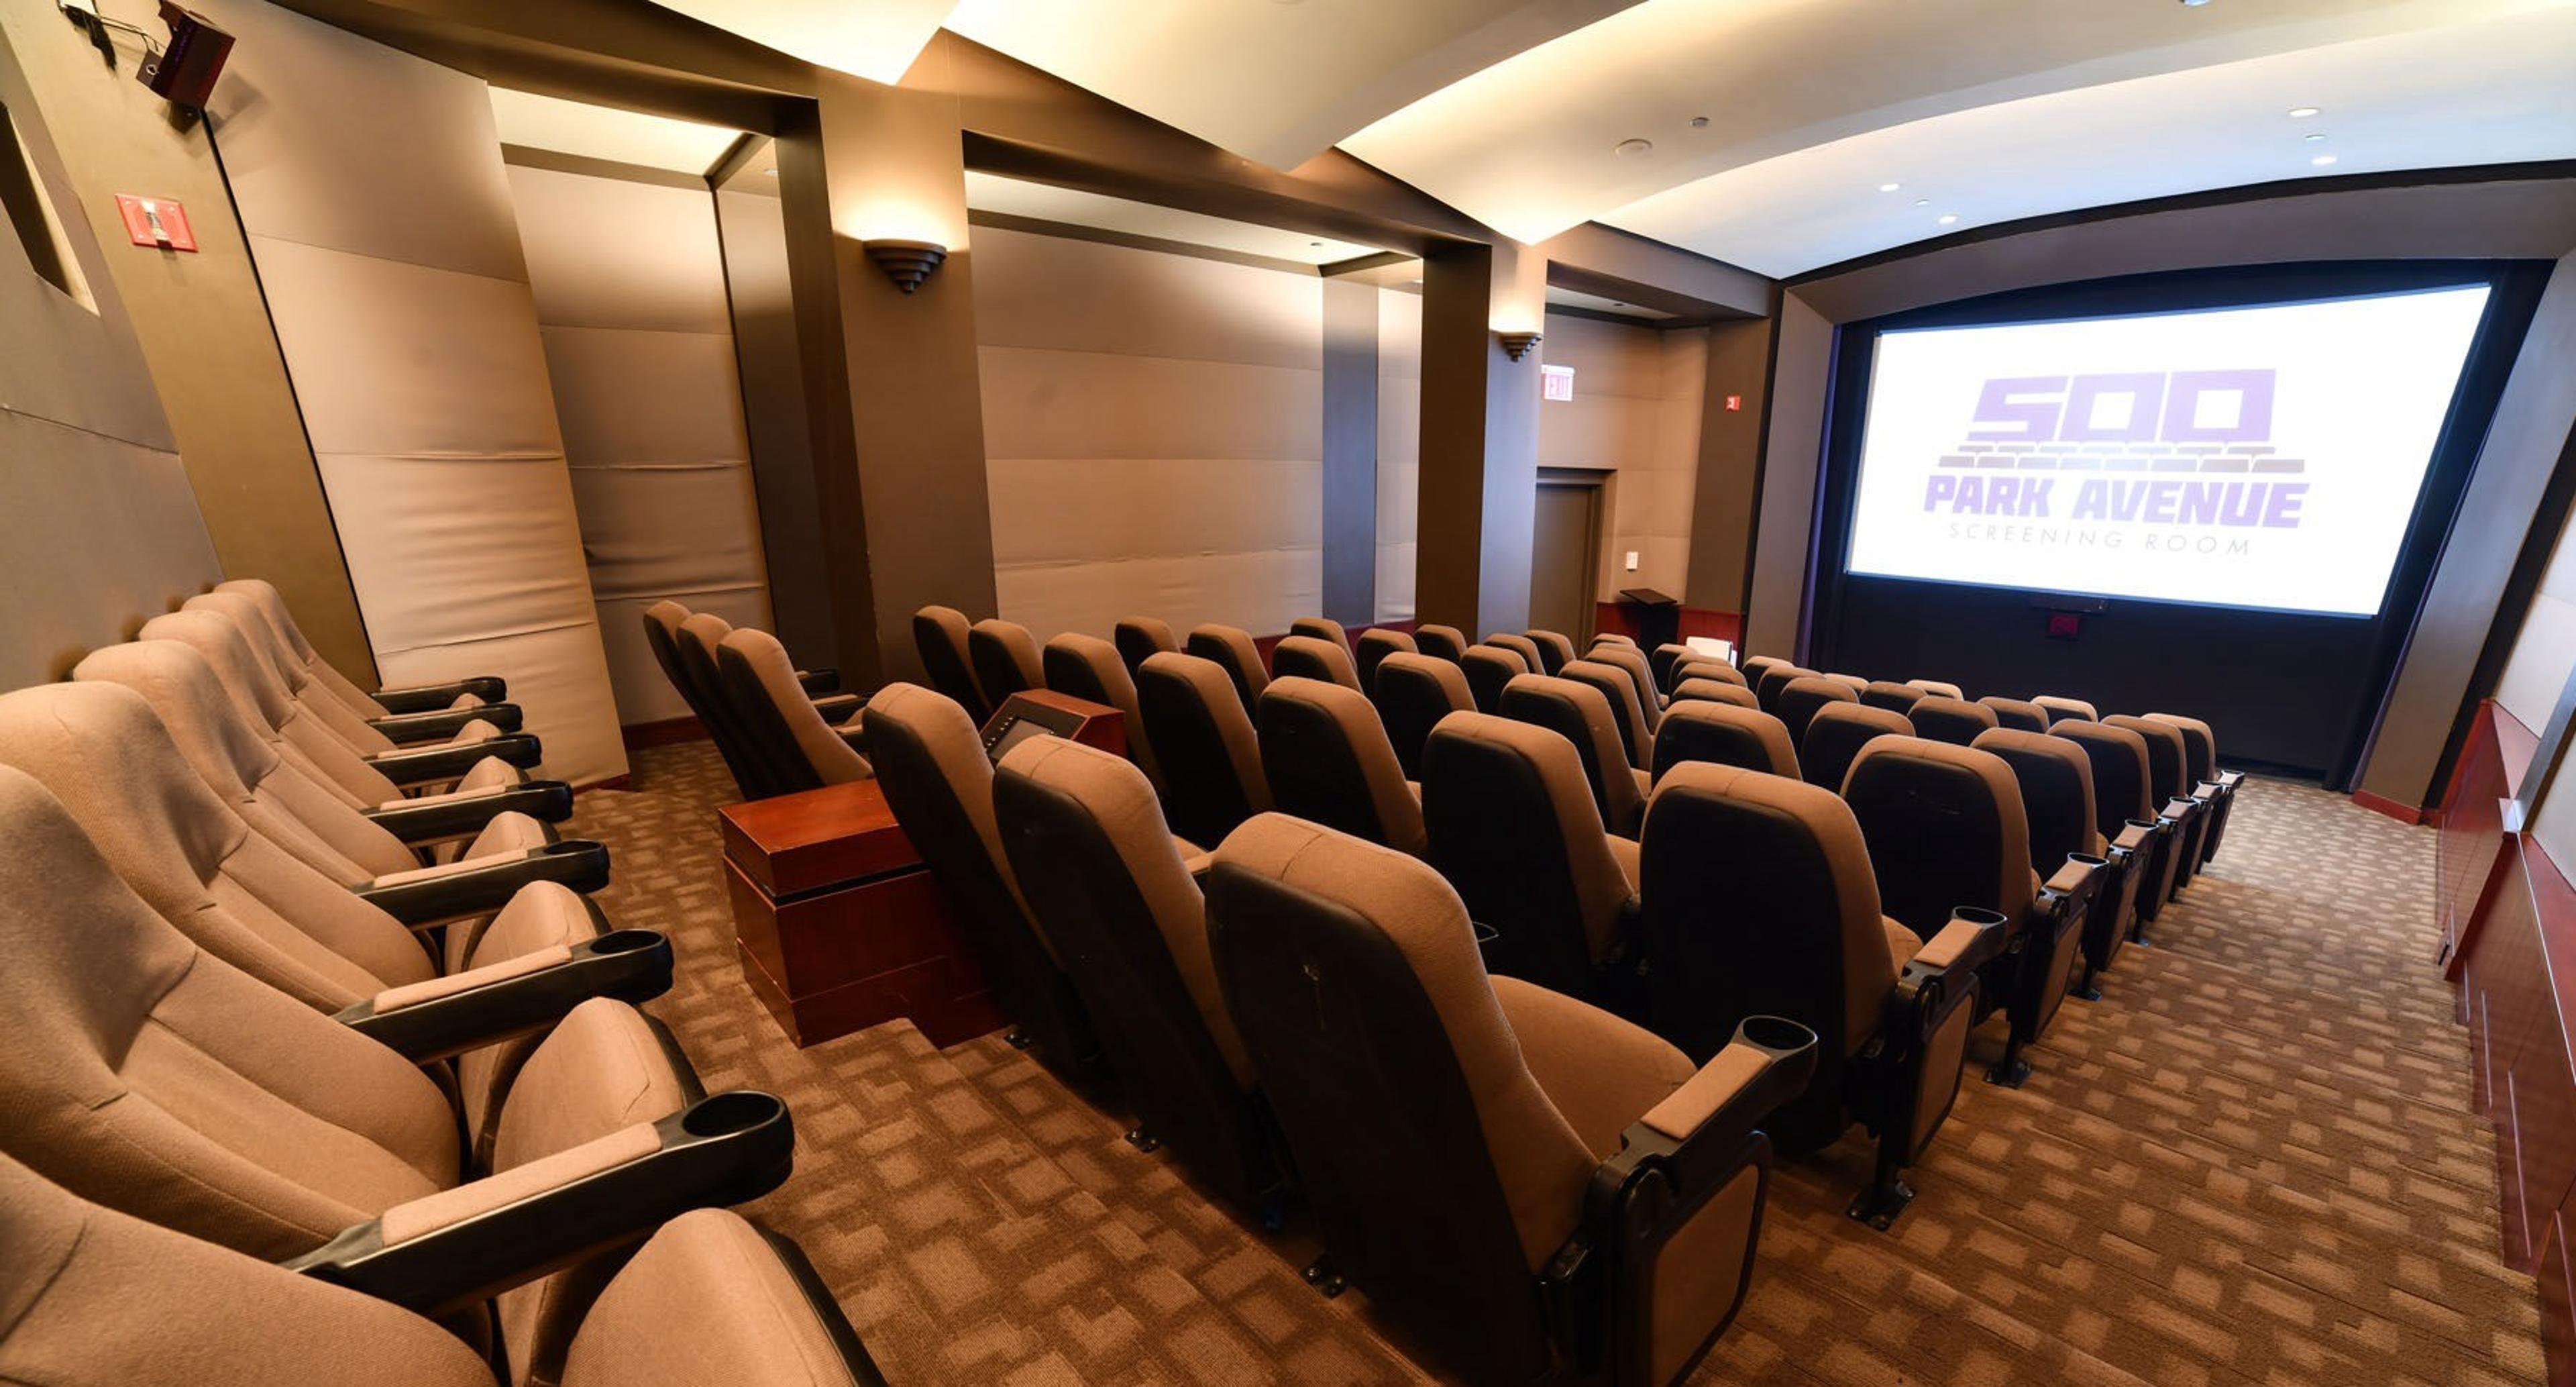 The 500 Park Ave Screening Room